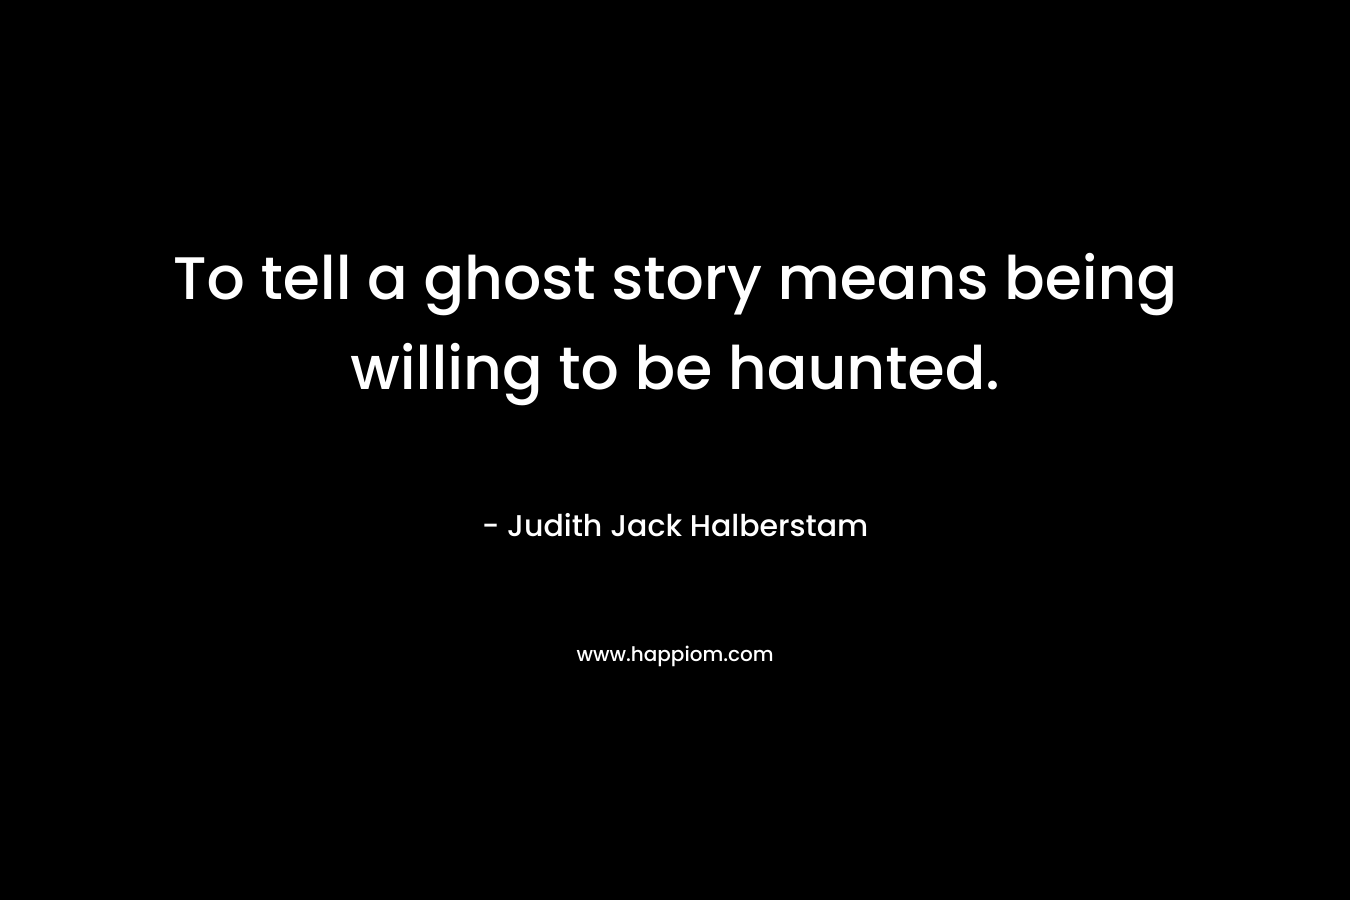 To tell a ghost story means being willing to be haunted. – Judith Jack Halberstam